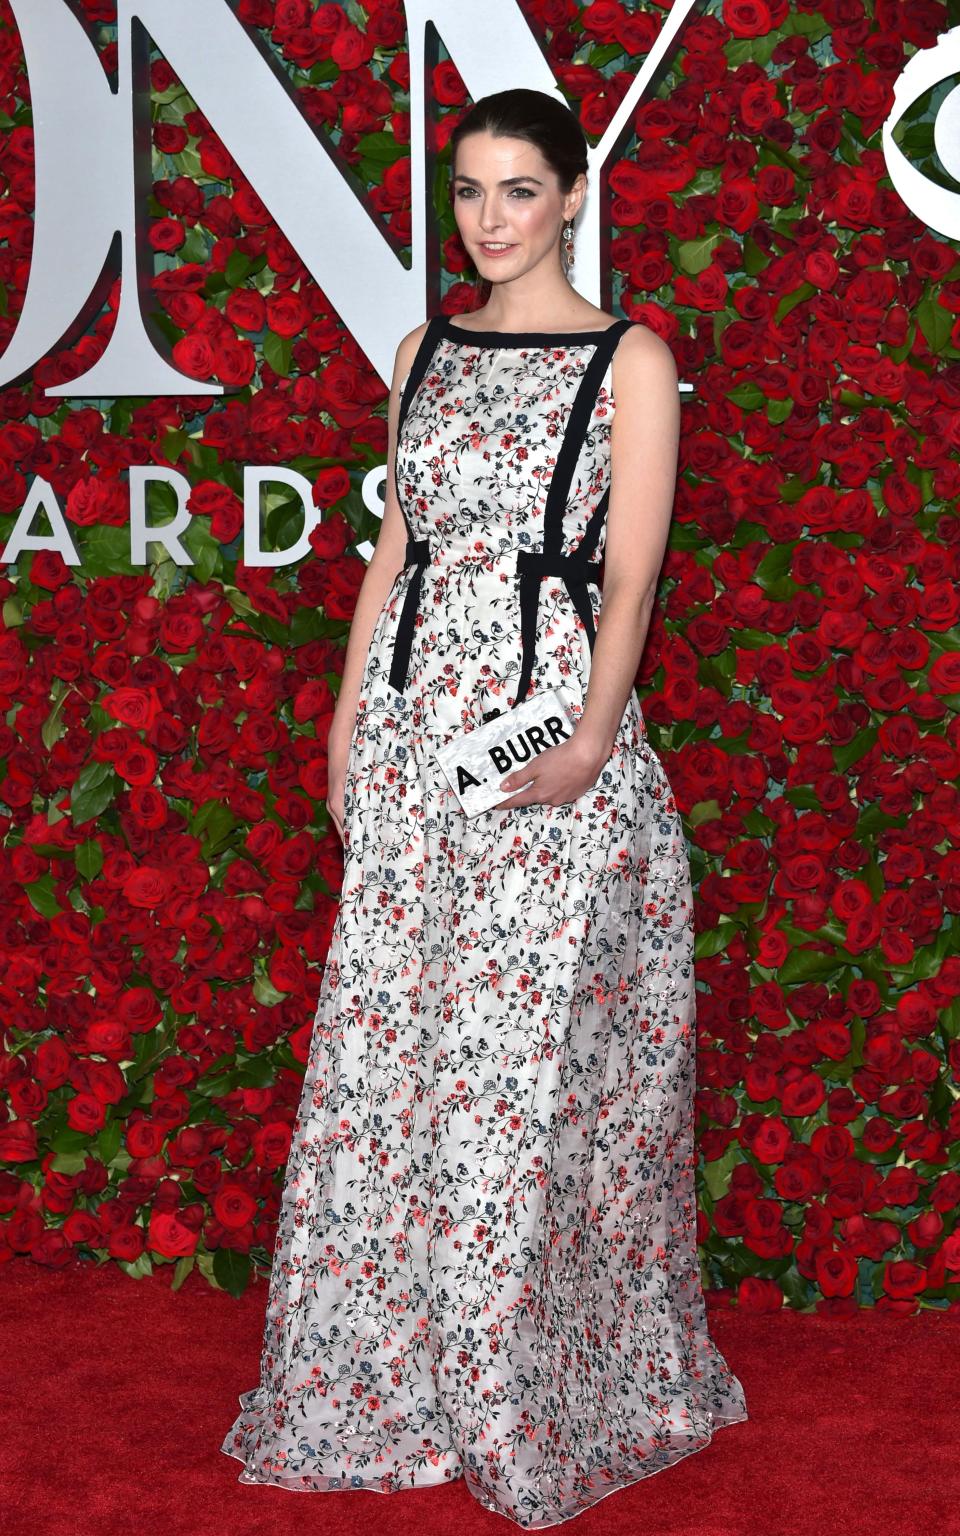 Bee Shaffer wearing Erdem at the Tony Awards - Credit: Rex